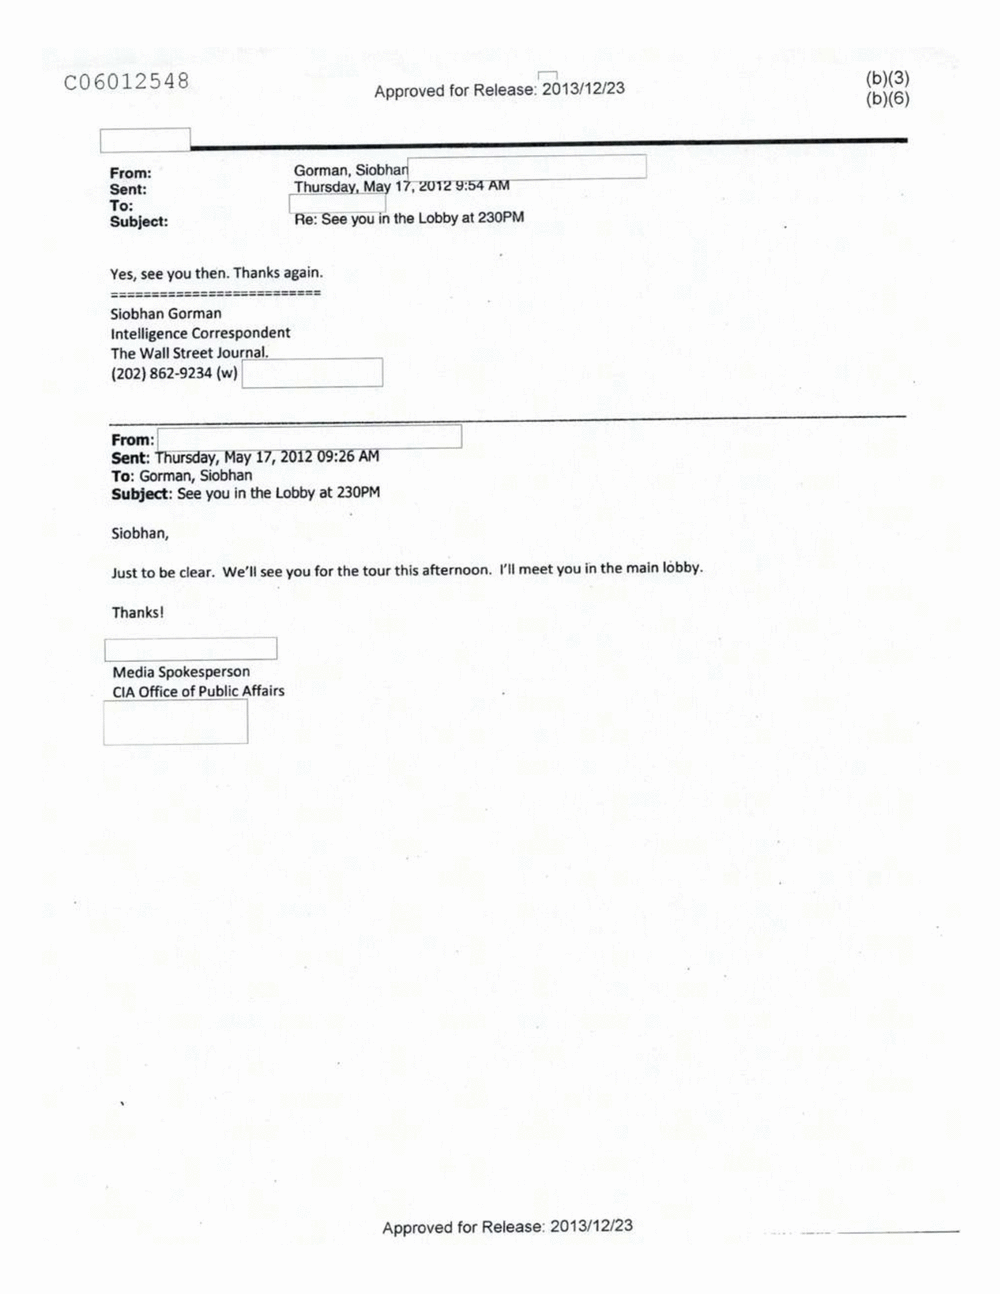 Page 84 from Email Correspondence Between Reporters and CIA Flacks